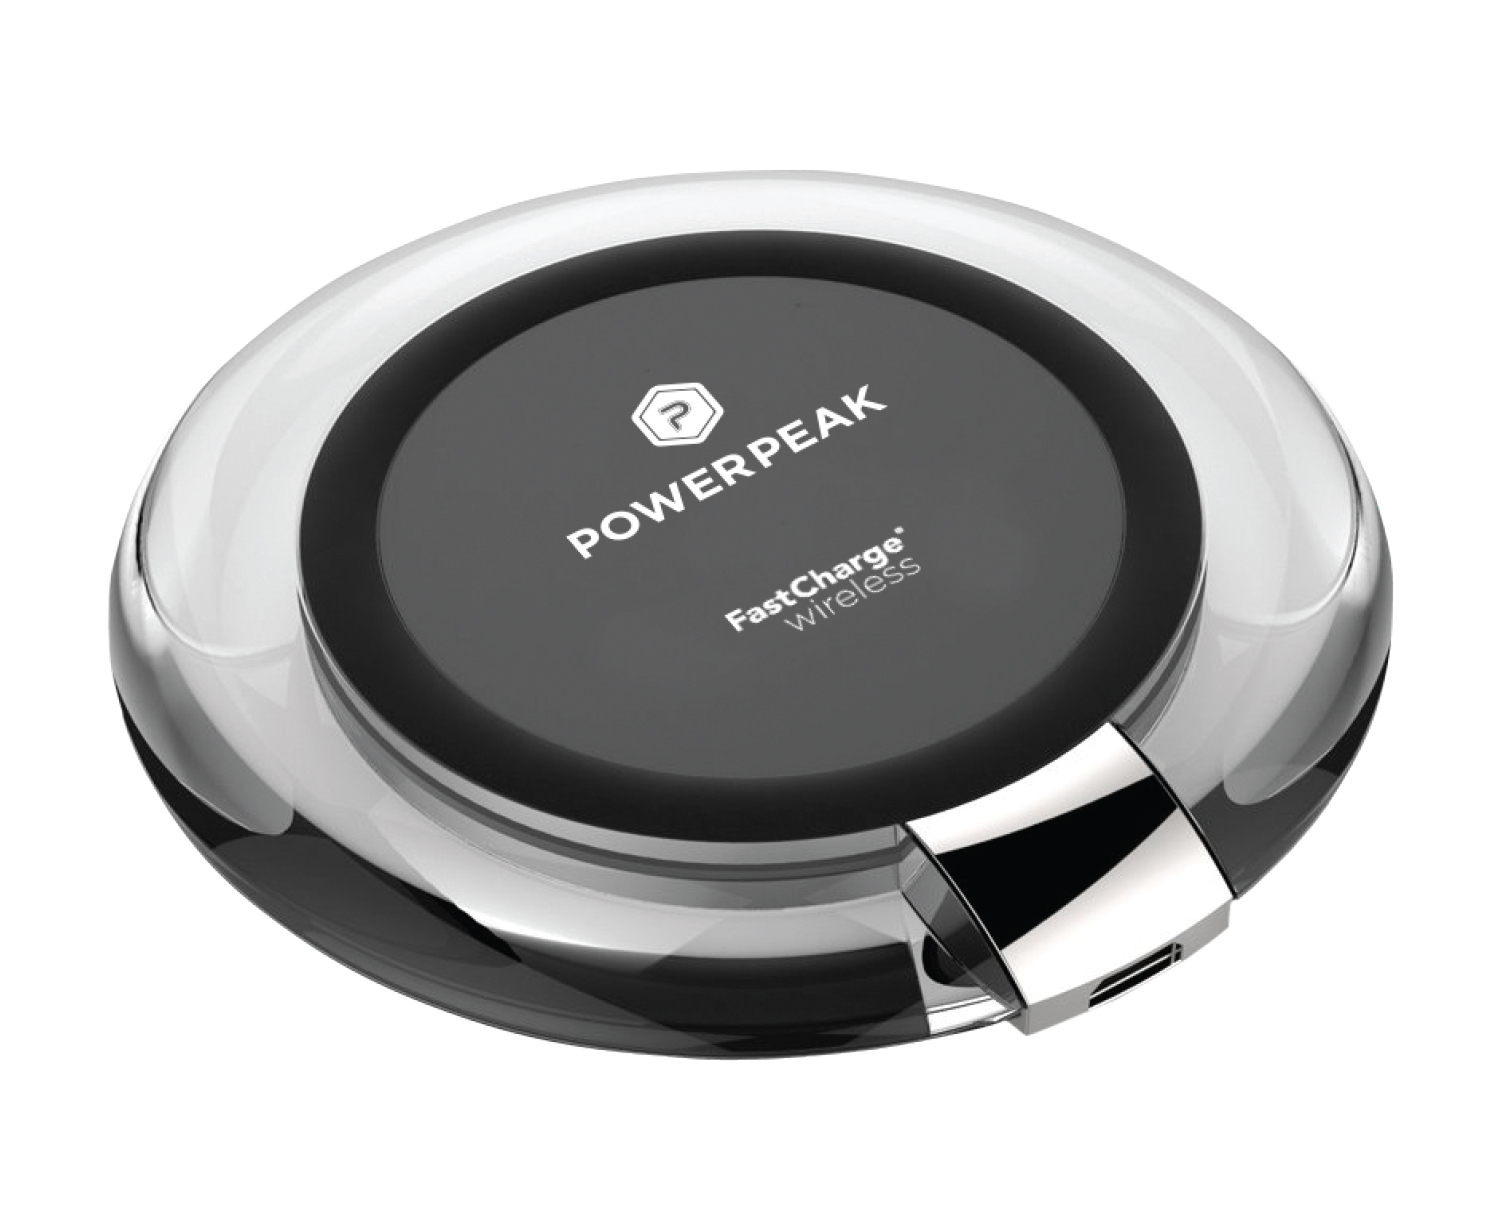 PowerPeak Fast-Charge Wireless Charging Pad (w Cable Only) 15W